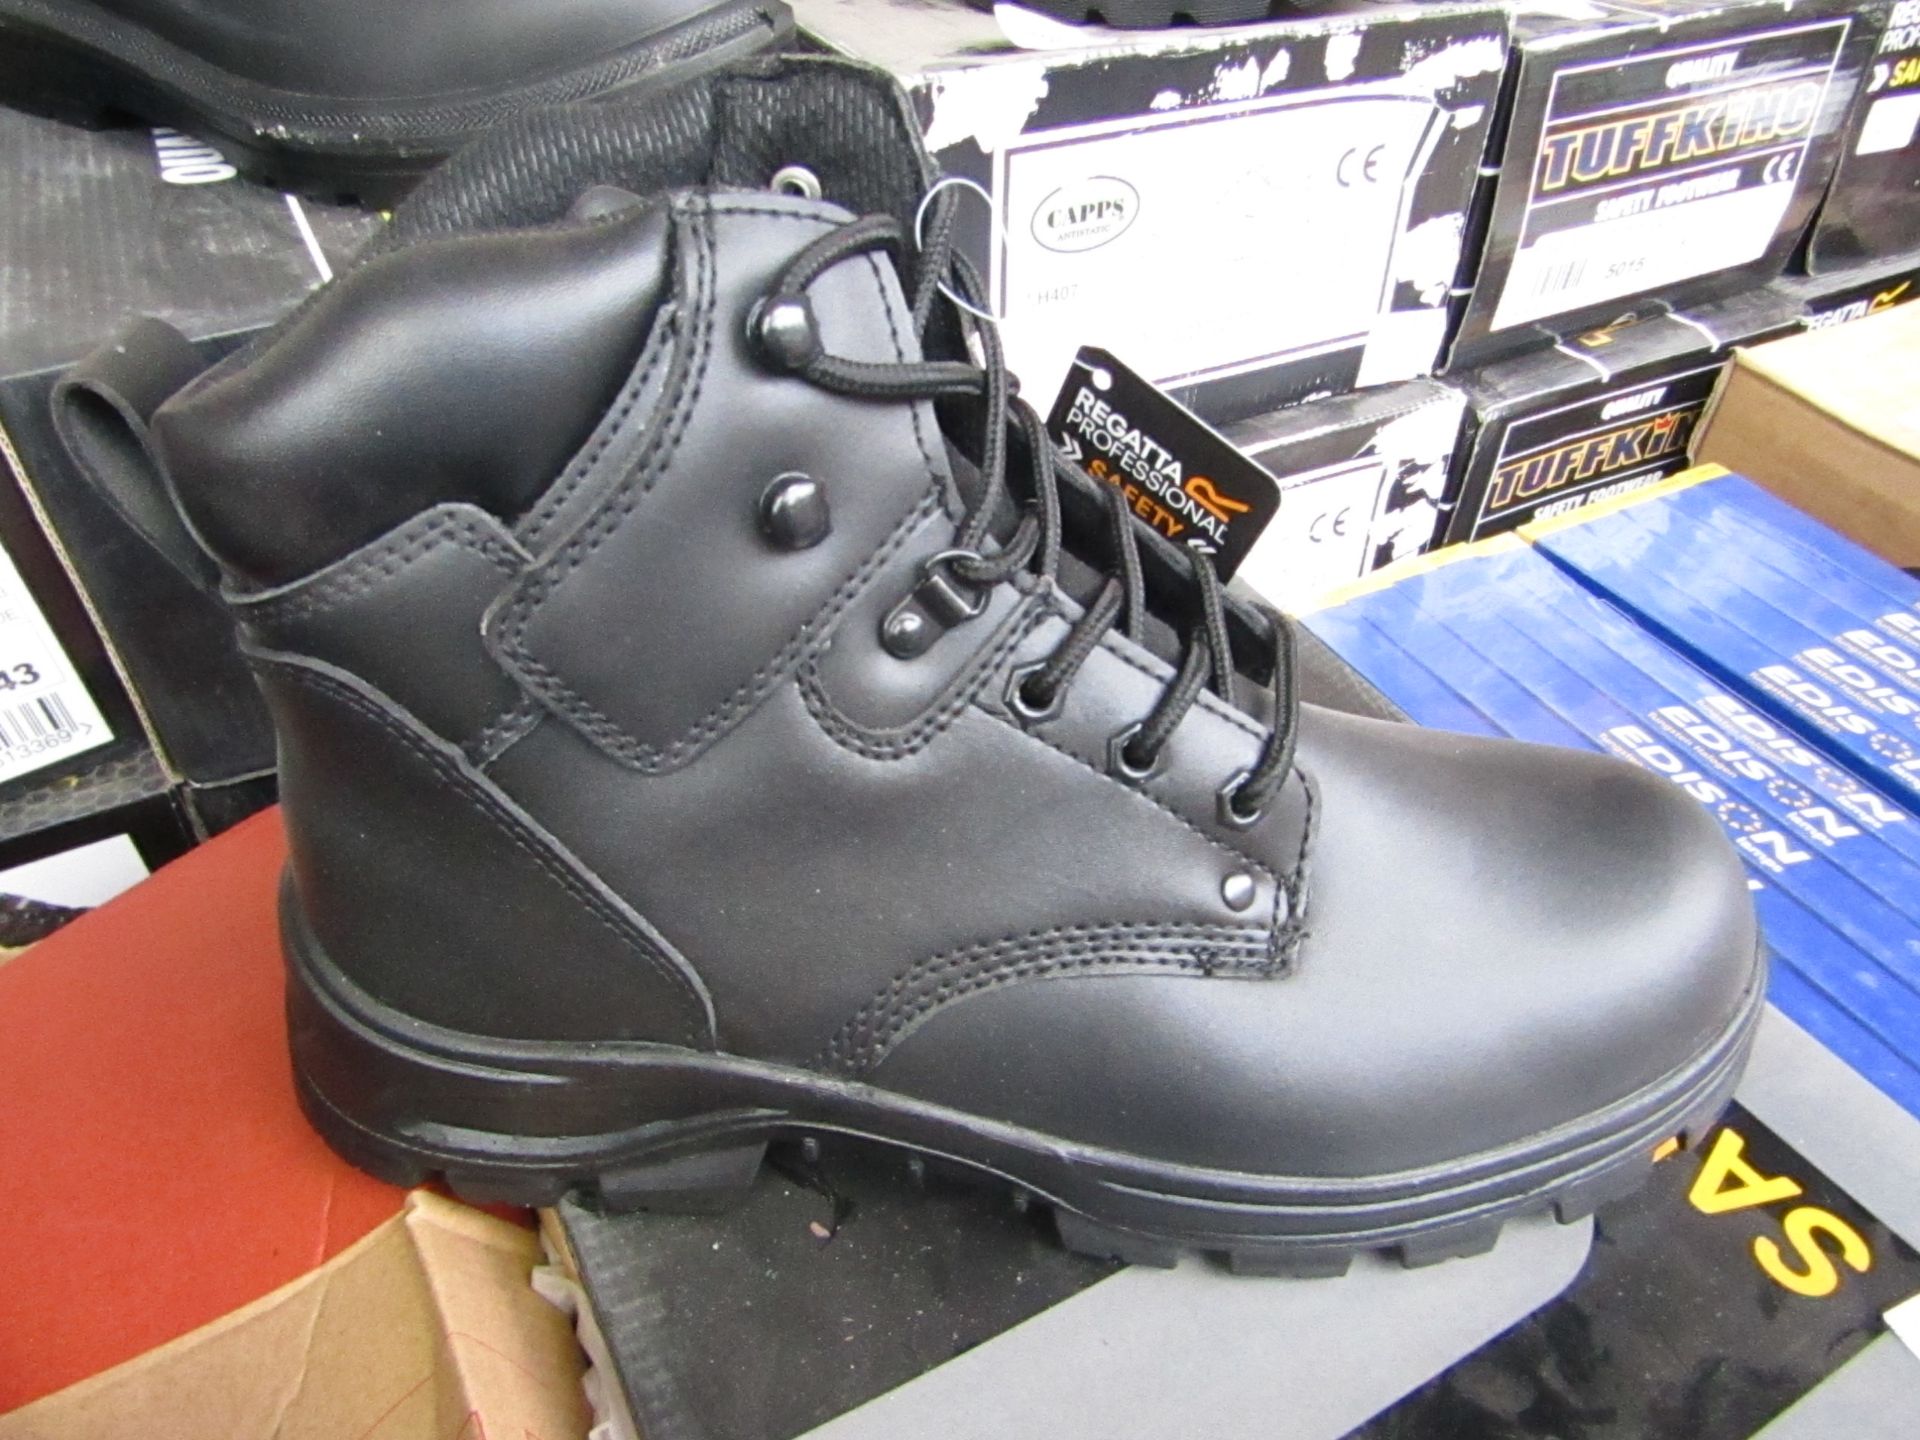 Regatta Crumpsall safety steel toe-cap boot, size 8, new and boxed.